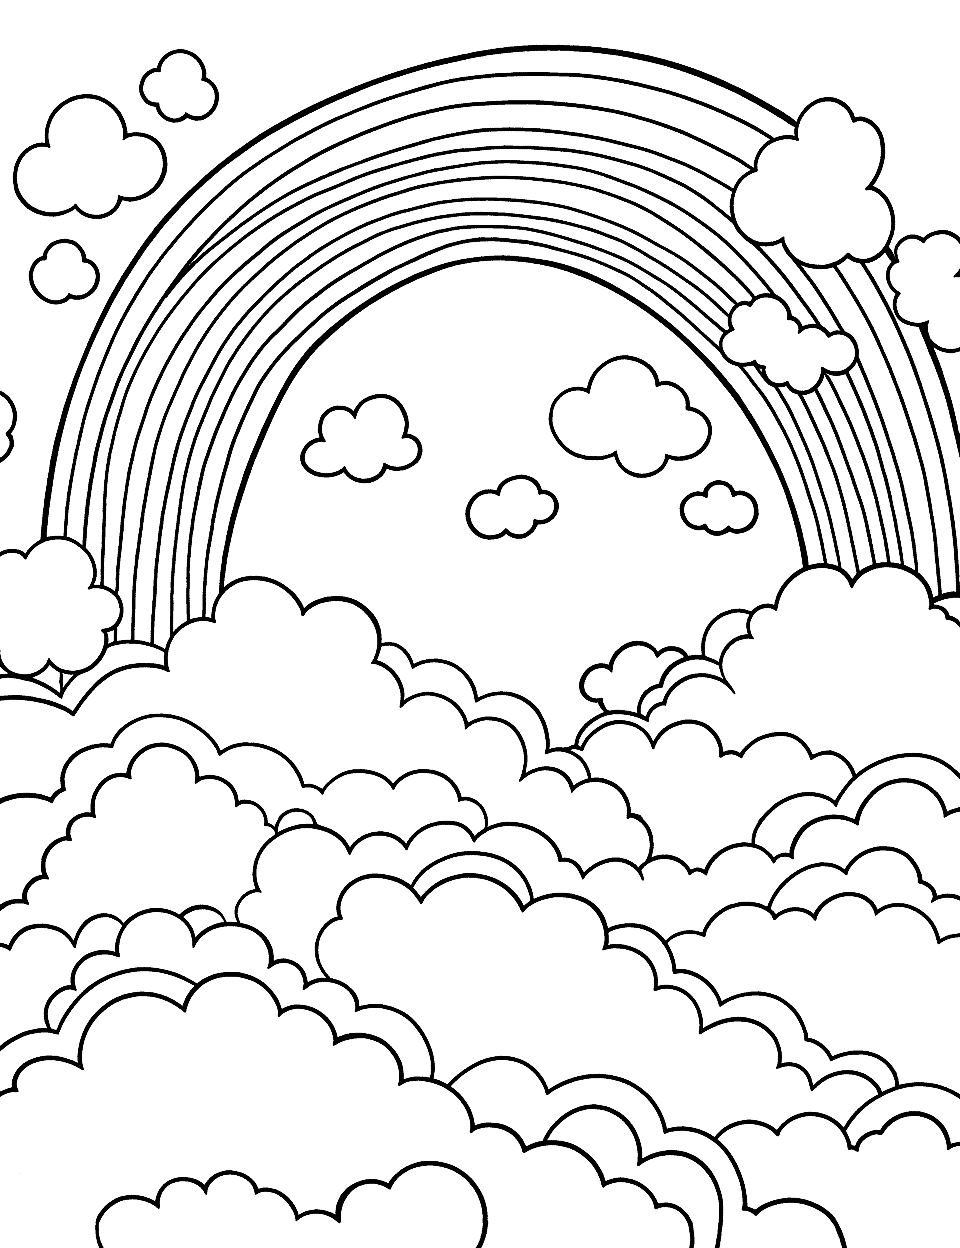 Rainbows and Clouds Cute Coloring Page - Fluffy clouds surrounded by vibrant rainbows in a blue sky.